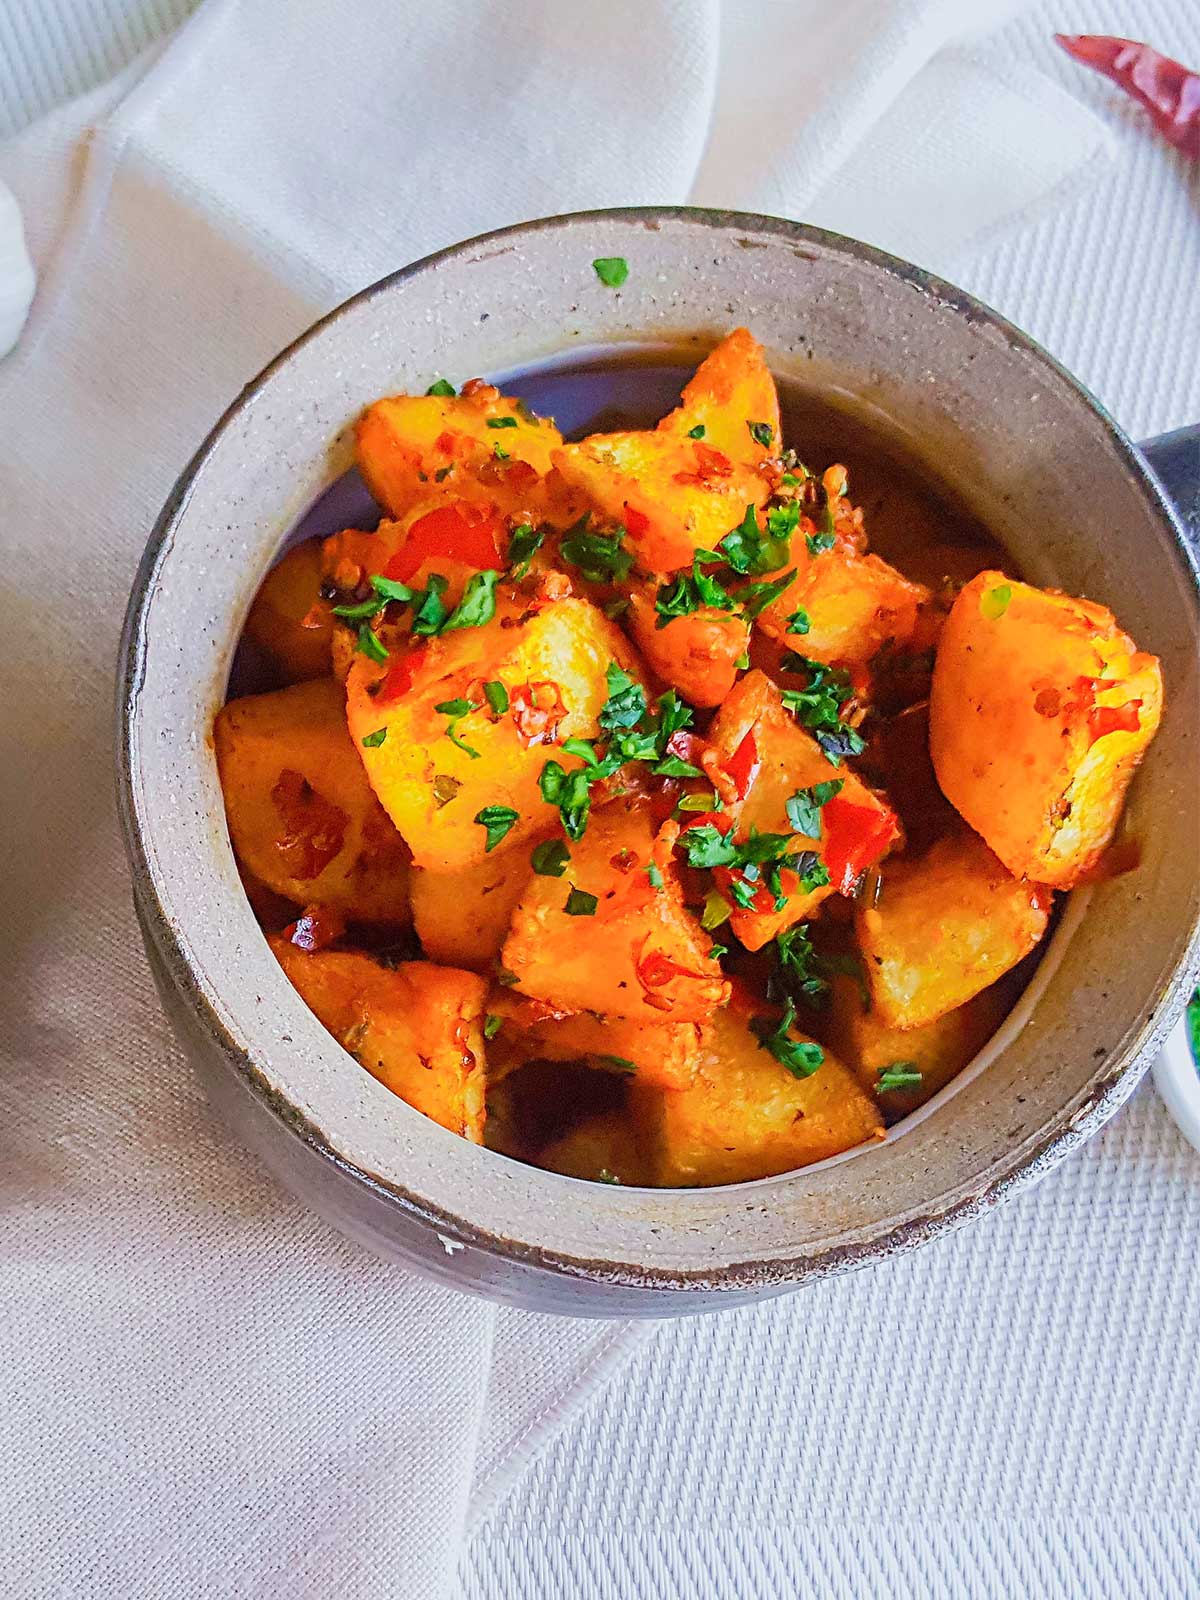 Batata Harrah served in a Bowl topped with cilantro and chilies